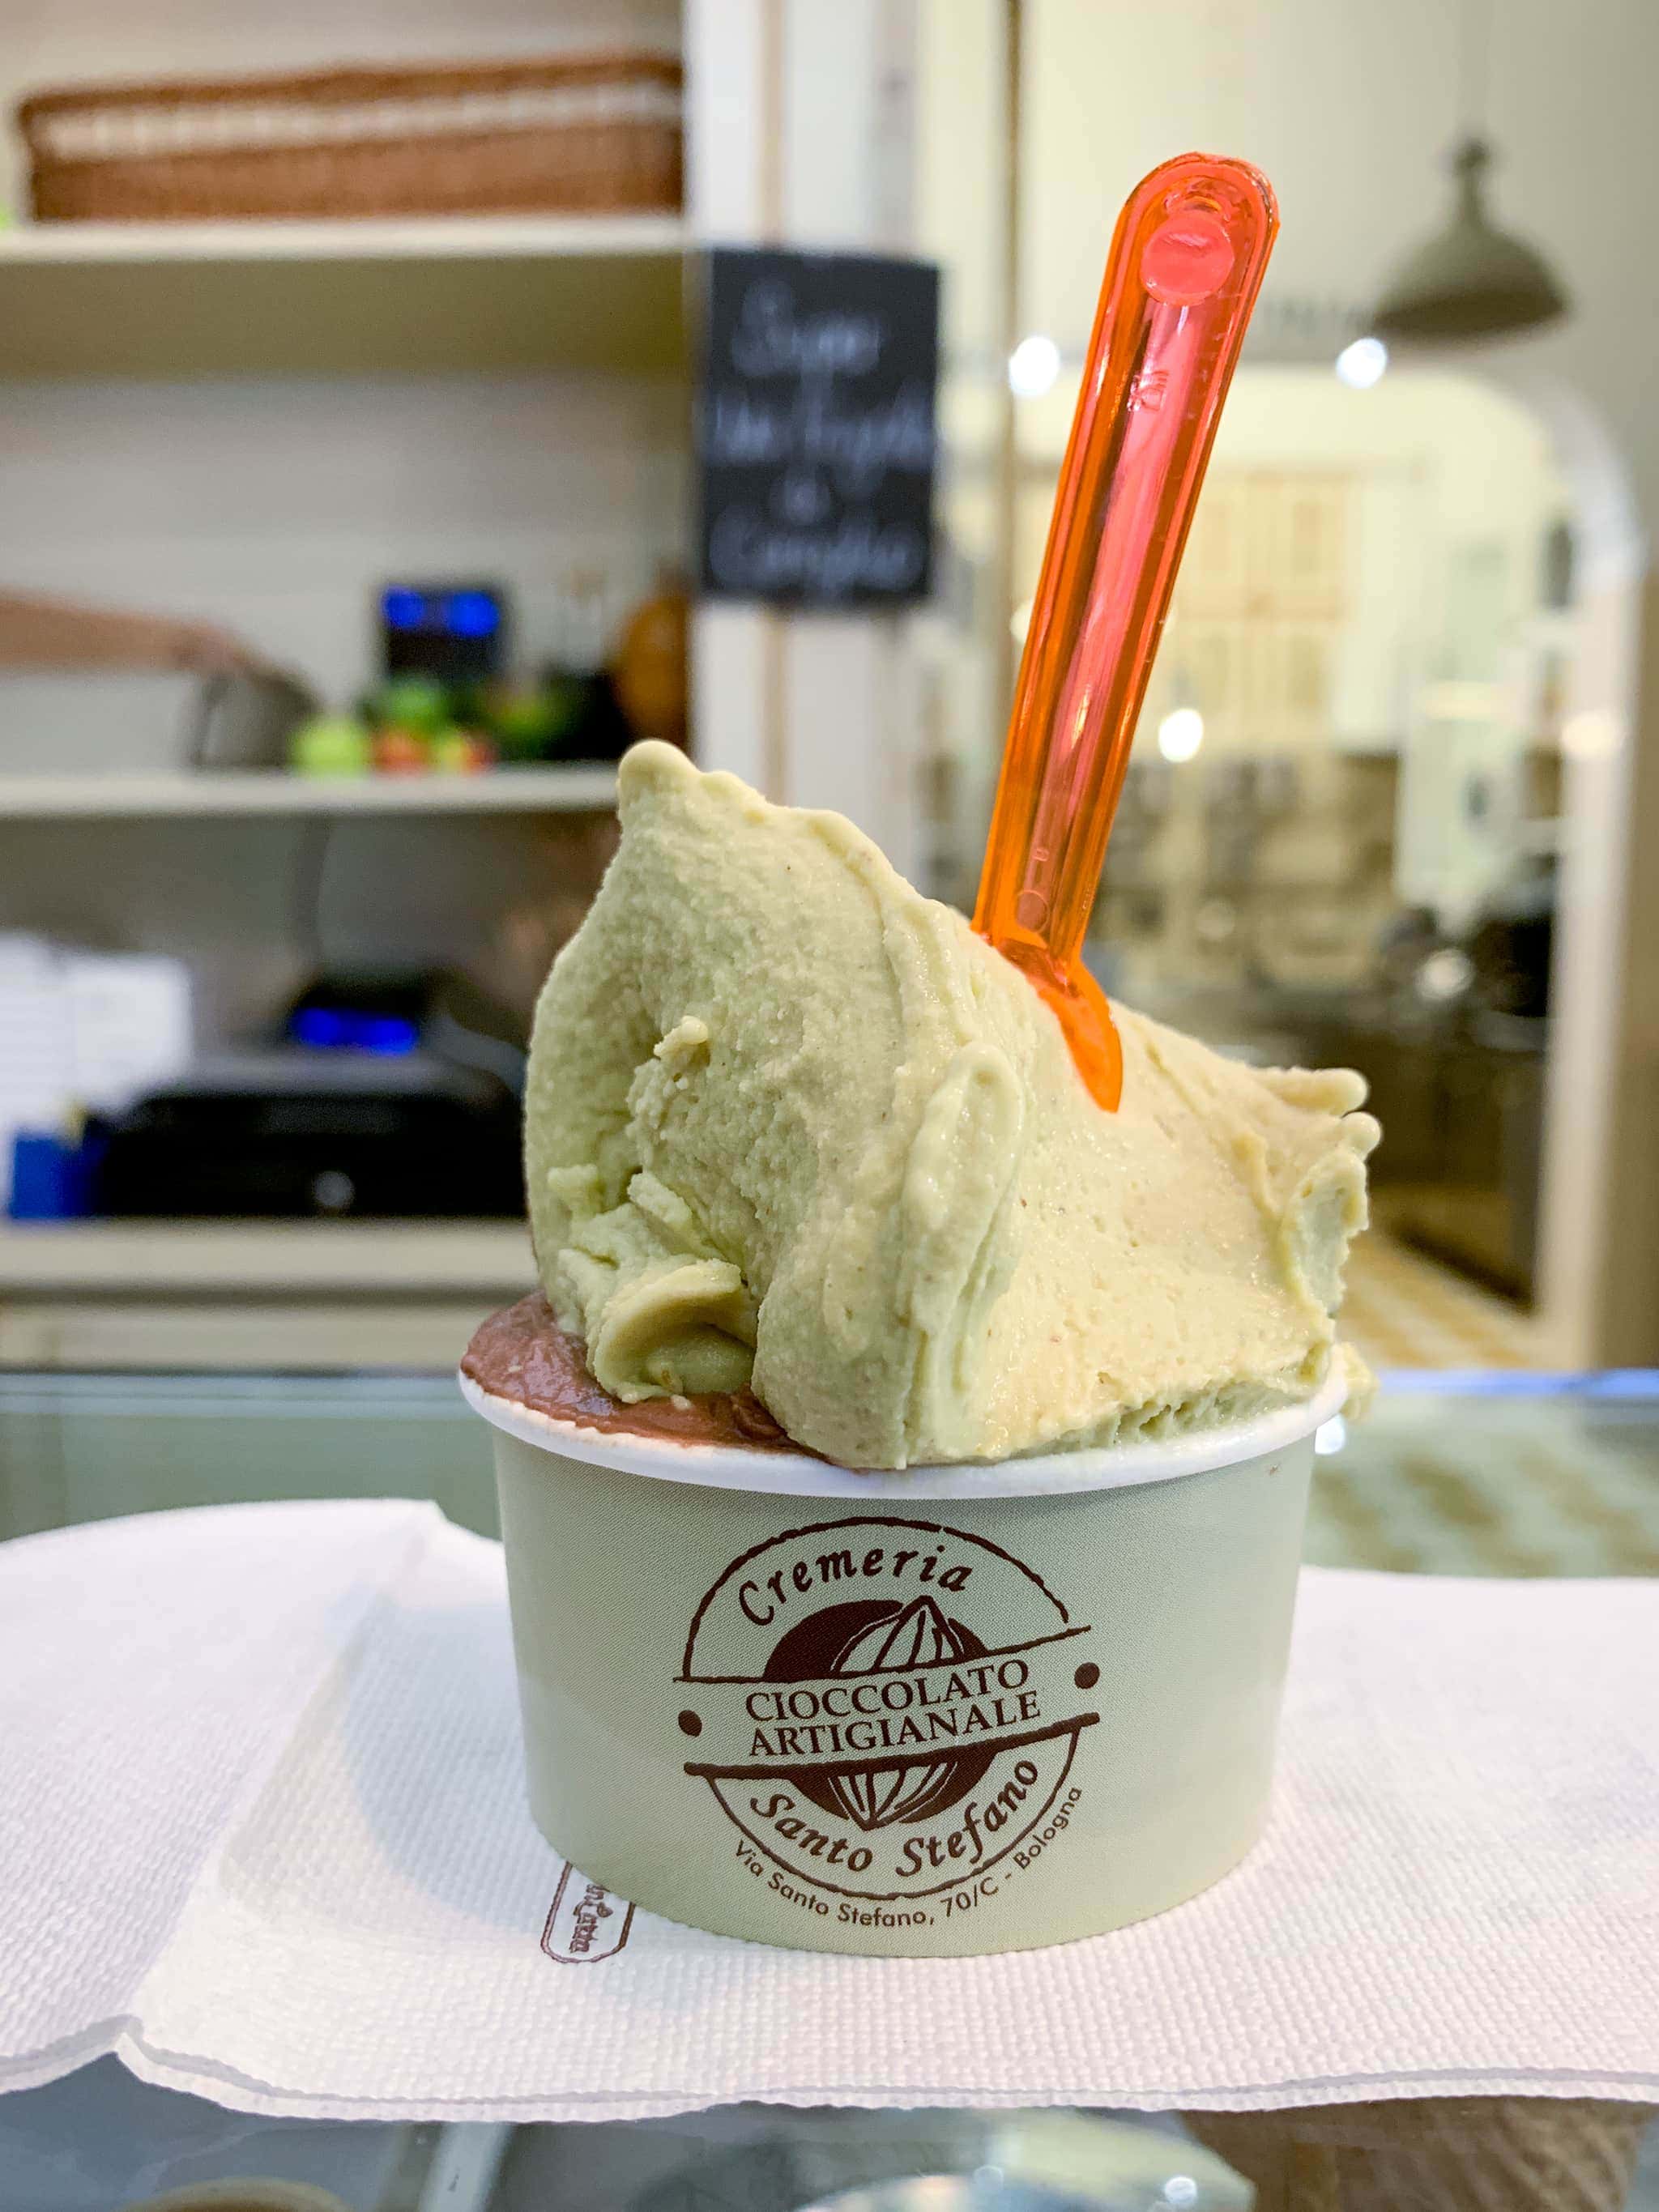 Cremeria Santo Stefano offers some of the best gelato in Bologna, like this cup of chocolate and pistachio